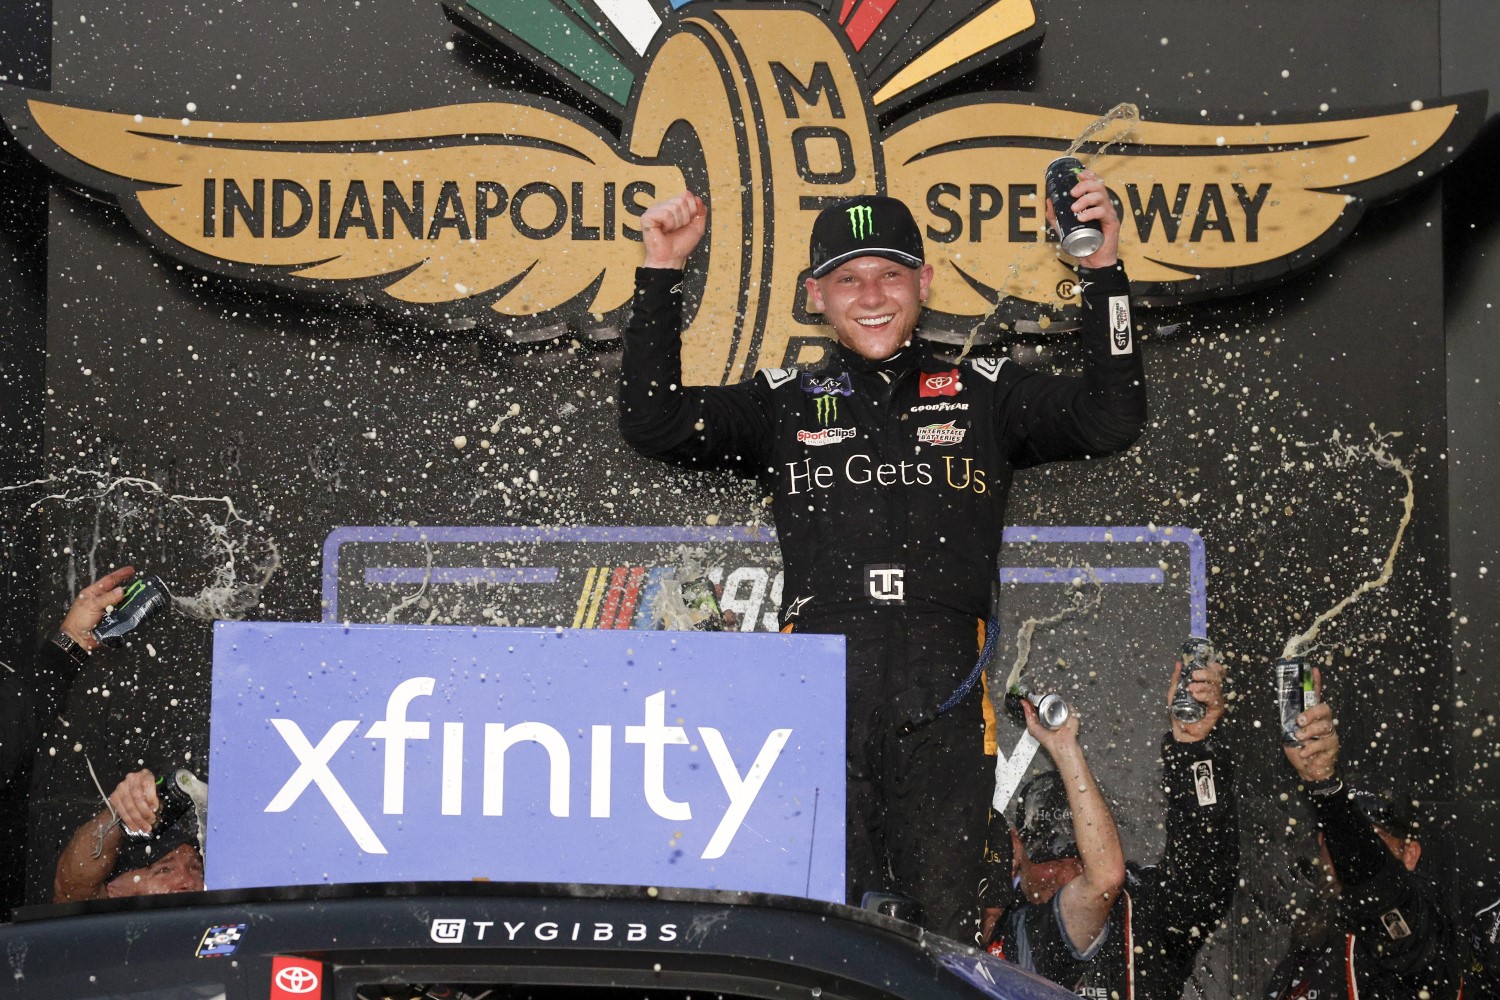 Ty Gibbs, driver of the #19 He Gets Us Toyota, celebrates in victory lane after winning the NASCAR Xfinity Series Pennzoil 150 at the Brickyard at Indianapolis Motor Speedway on August 12, 2023 in Indianapolis, Indiana. (Photo by Sean Gardner/Getty Images)